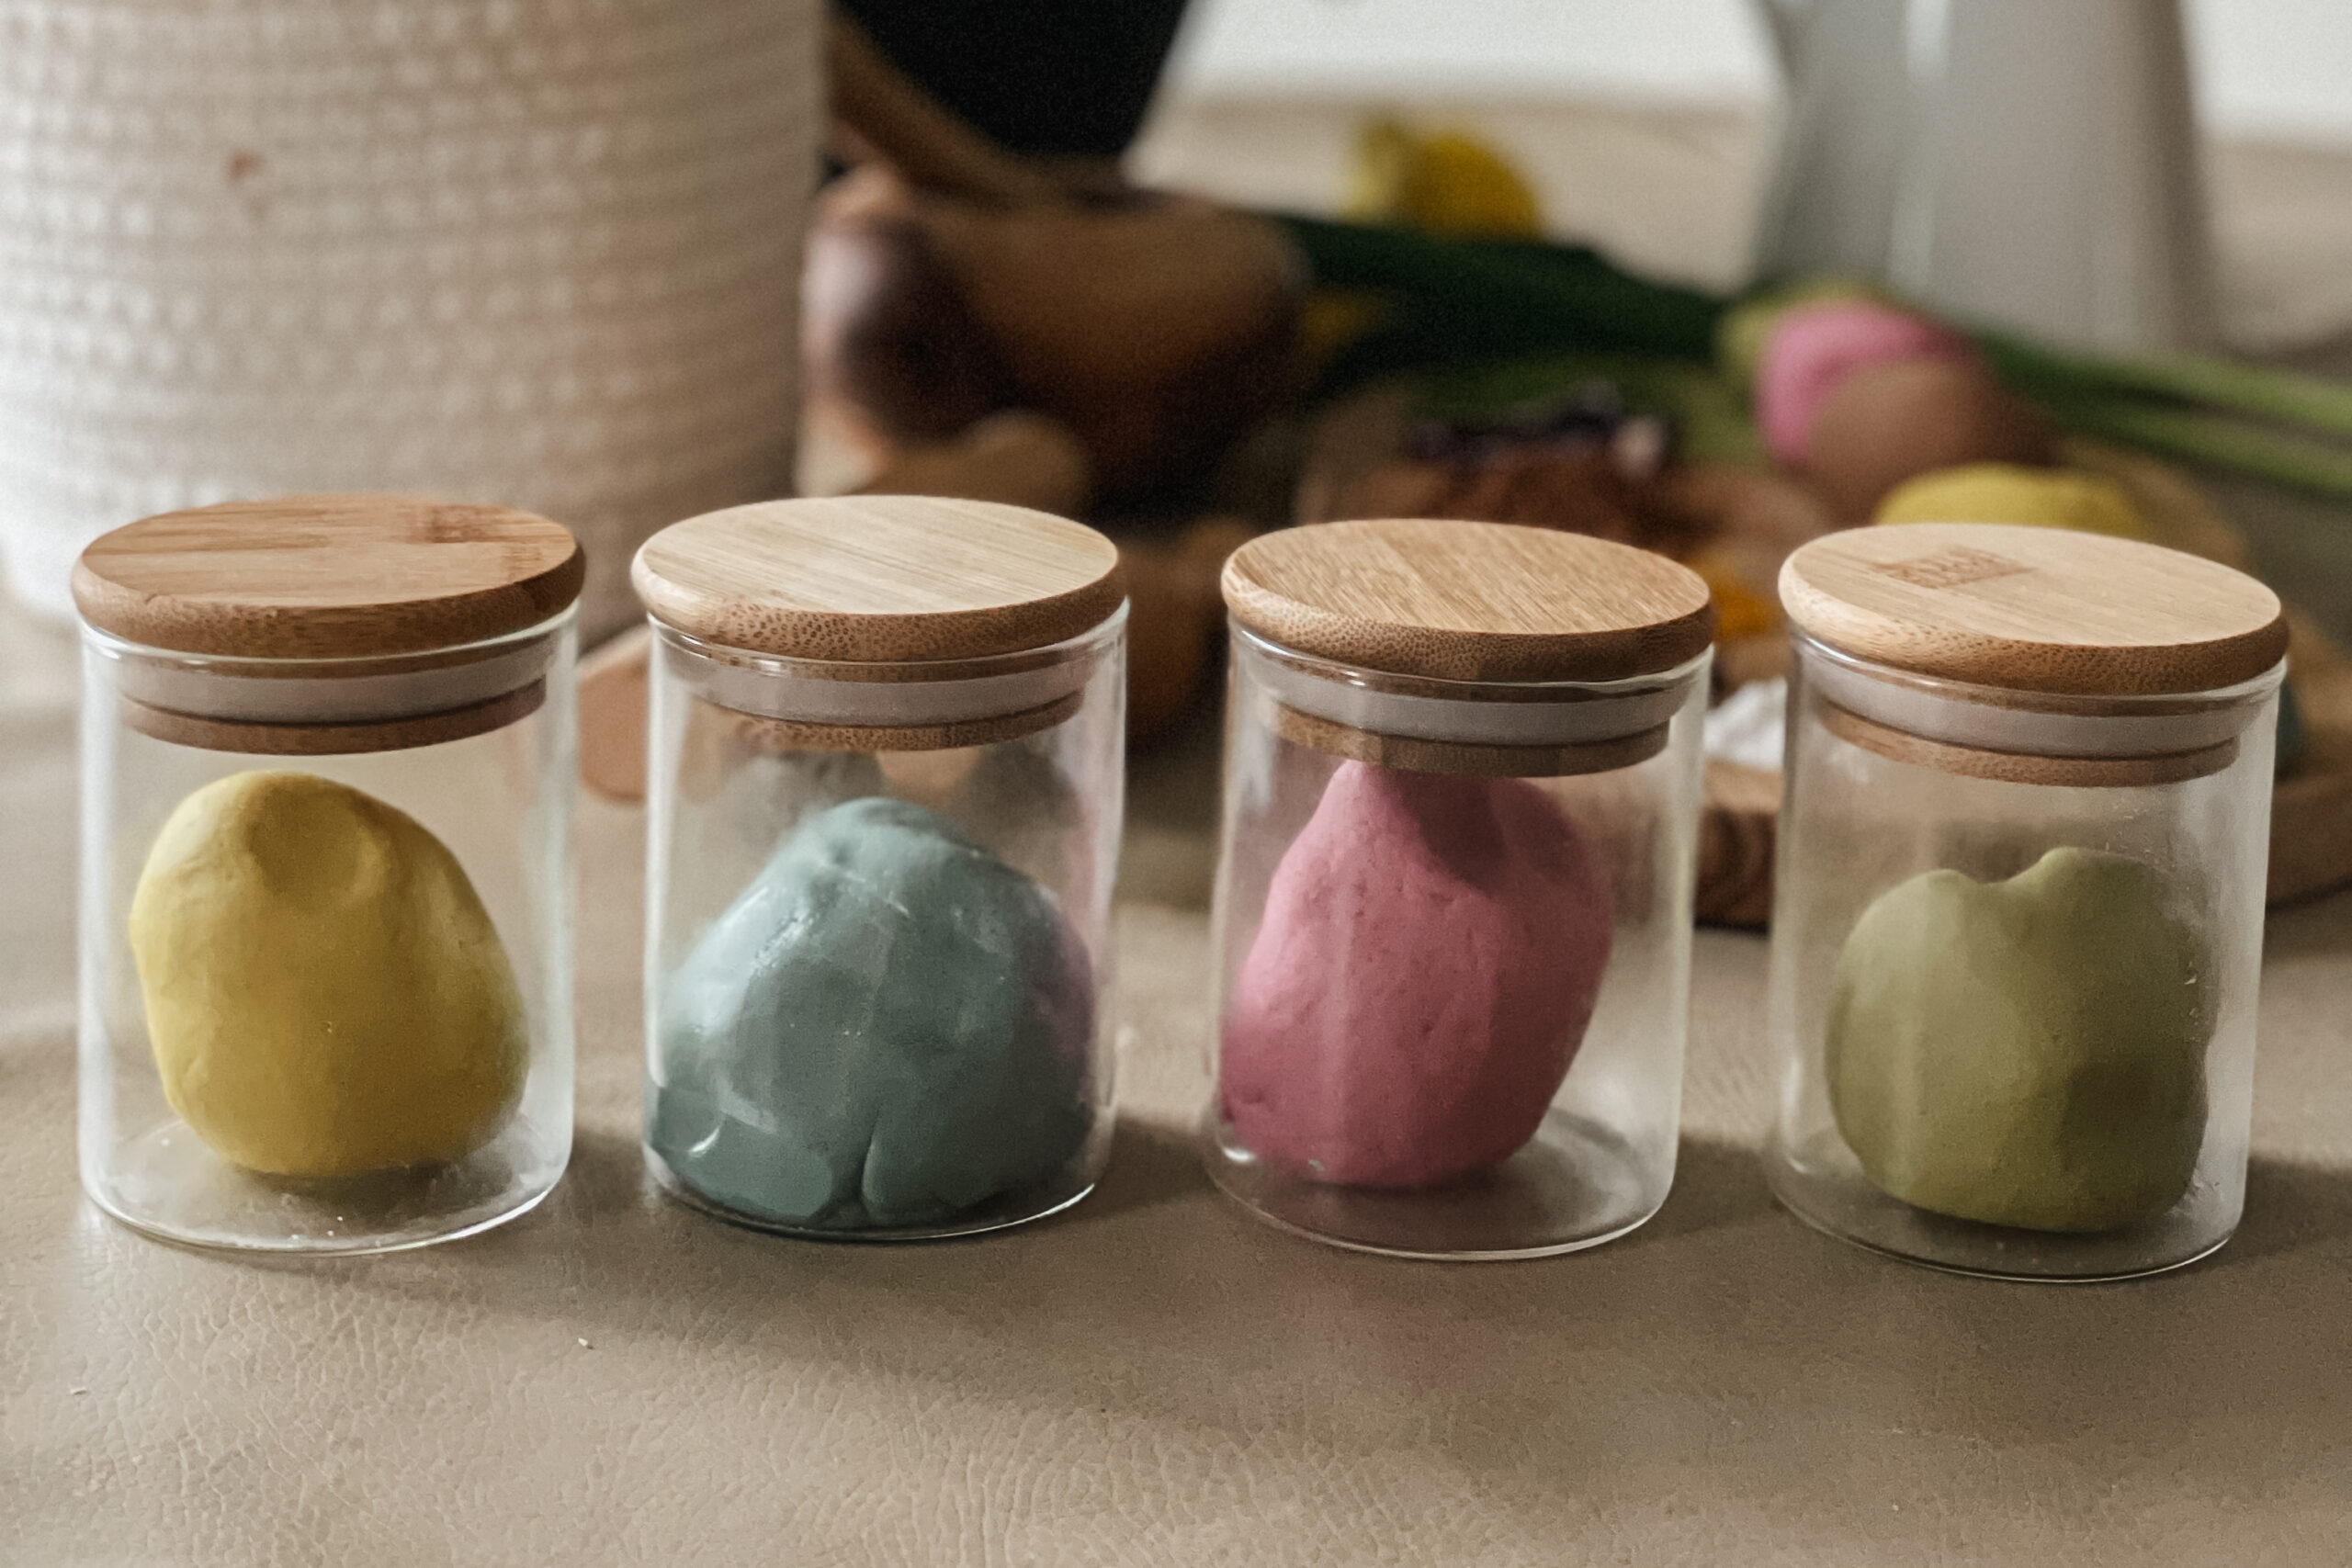 Naturally Dyed Playdough - Natural Dye Workshop by Herbal Academy